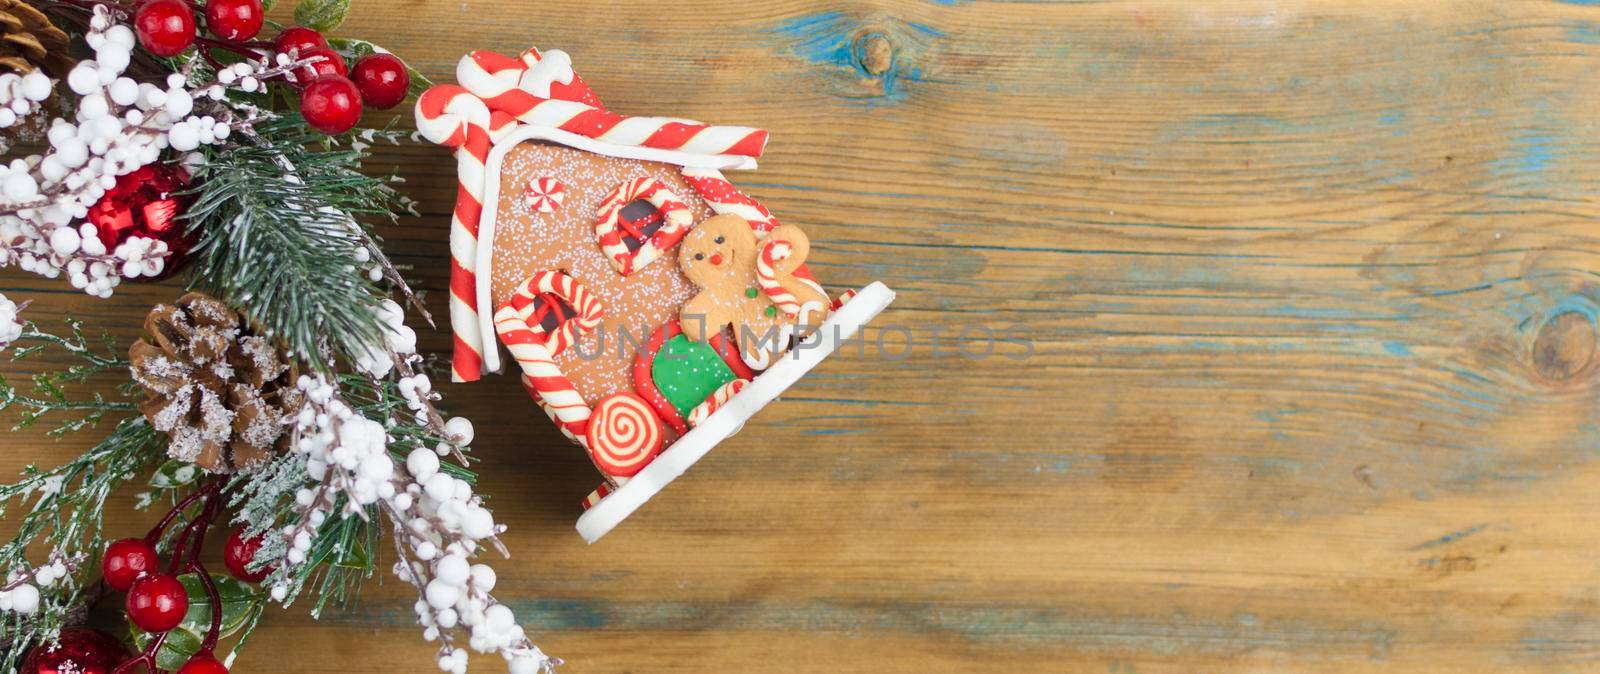 Gingerbread house with Christmas decorations on wooden background with space for your text by inxti